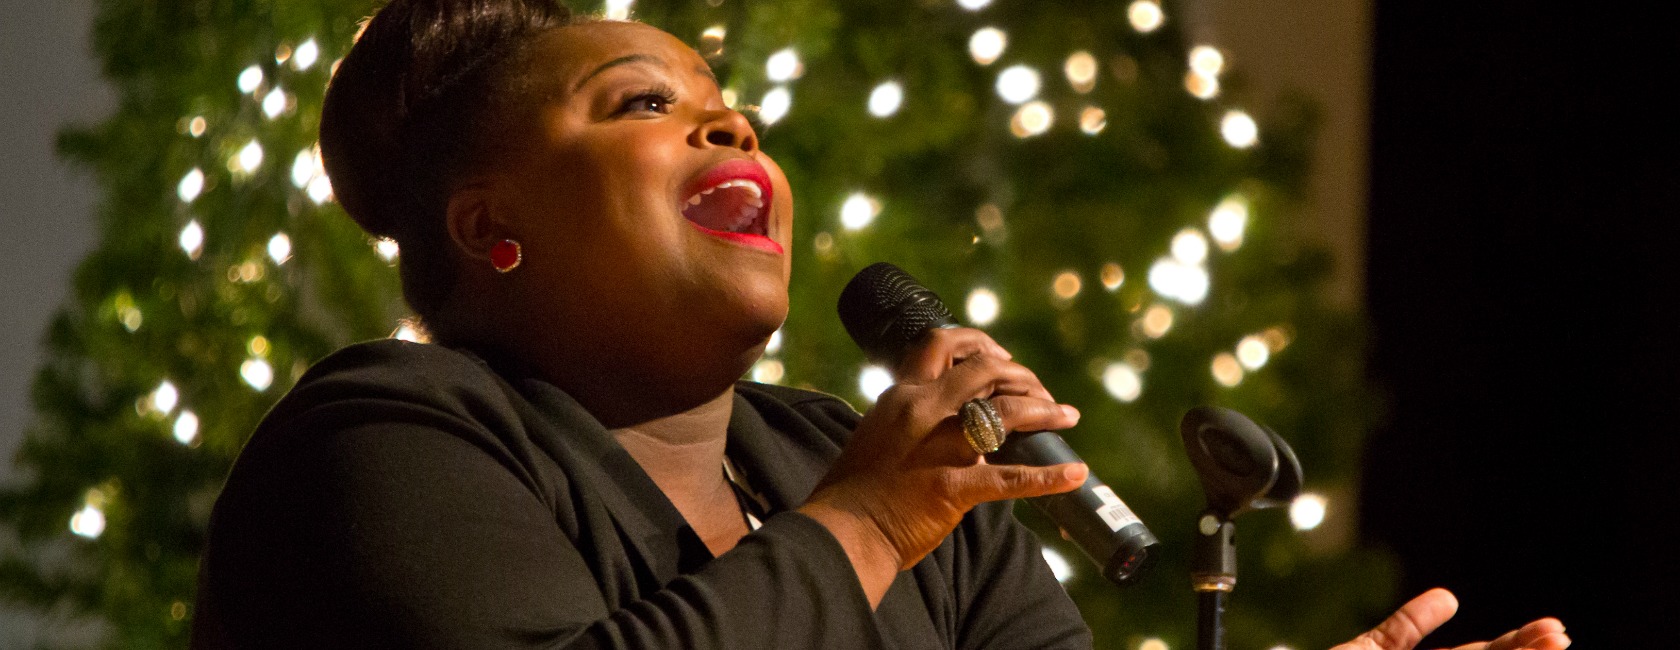 Crystal Aiken '97 returned to PLU in December 2013 to perform at the annual holiday luncheon. (Photo: John Froschauer/PLU)